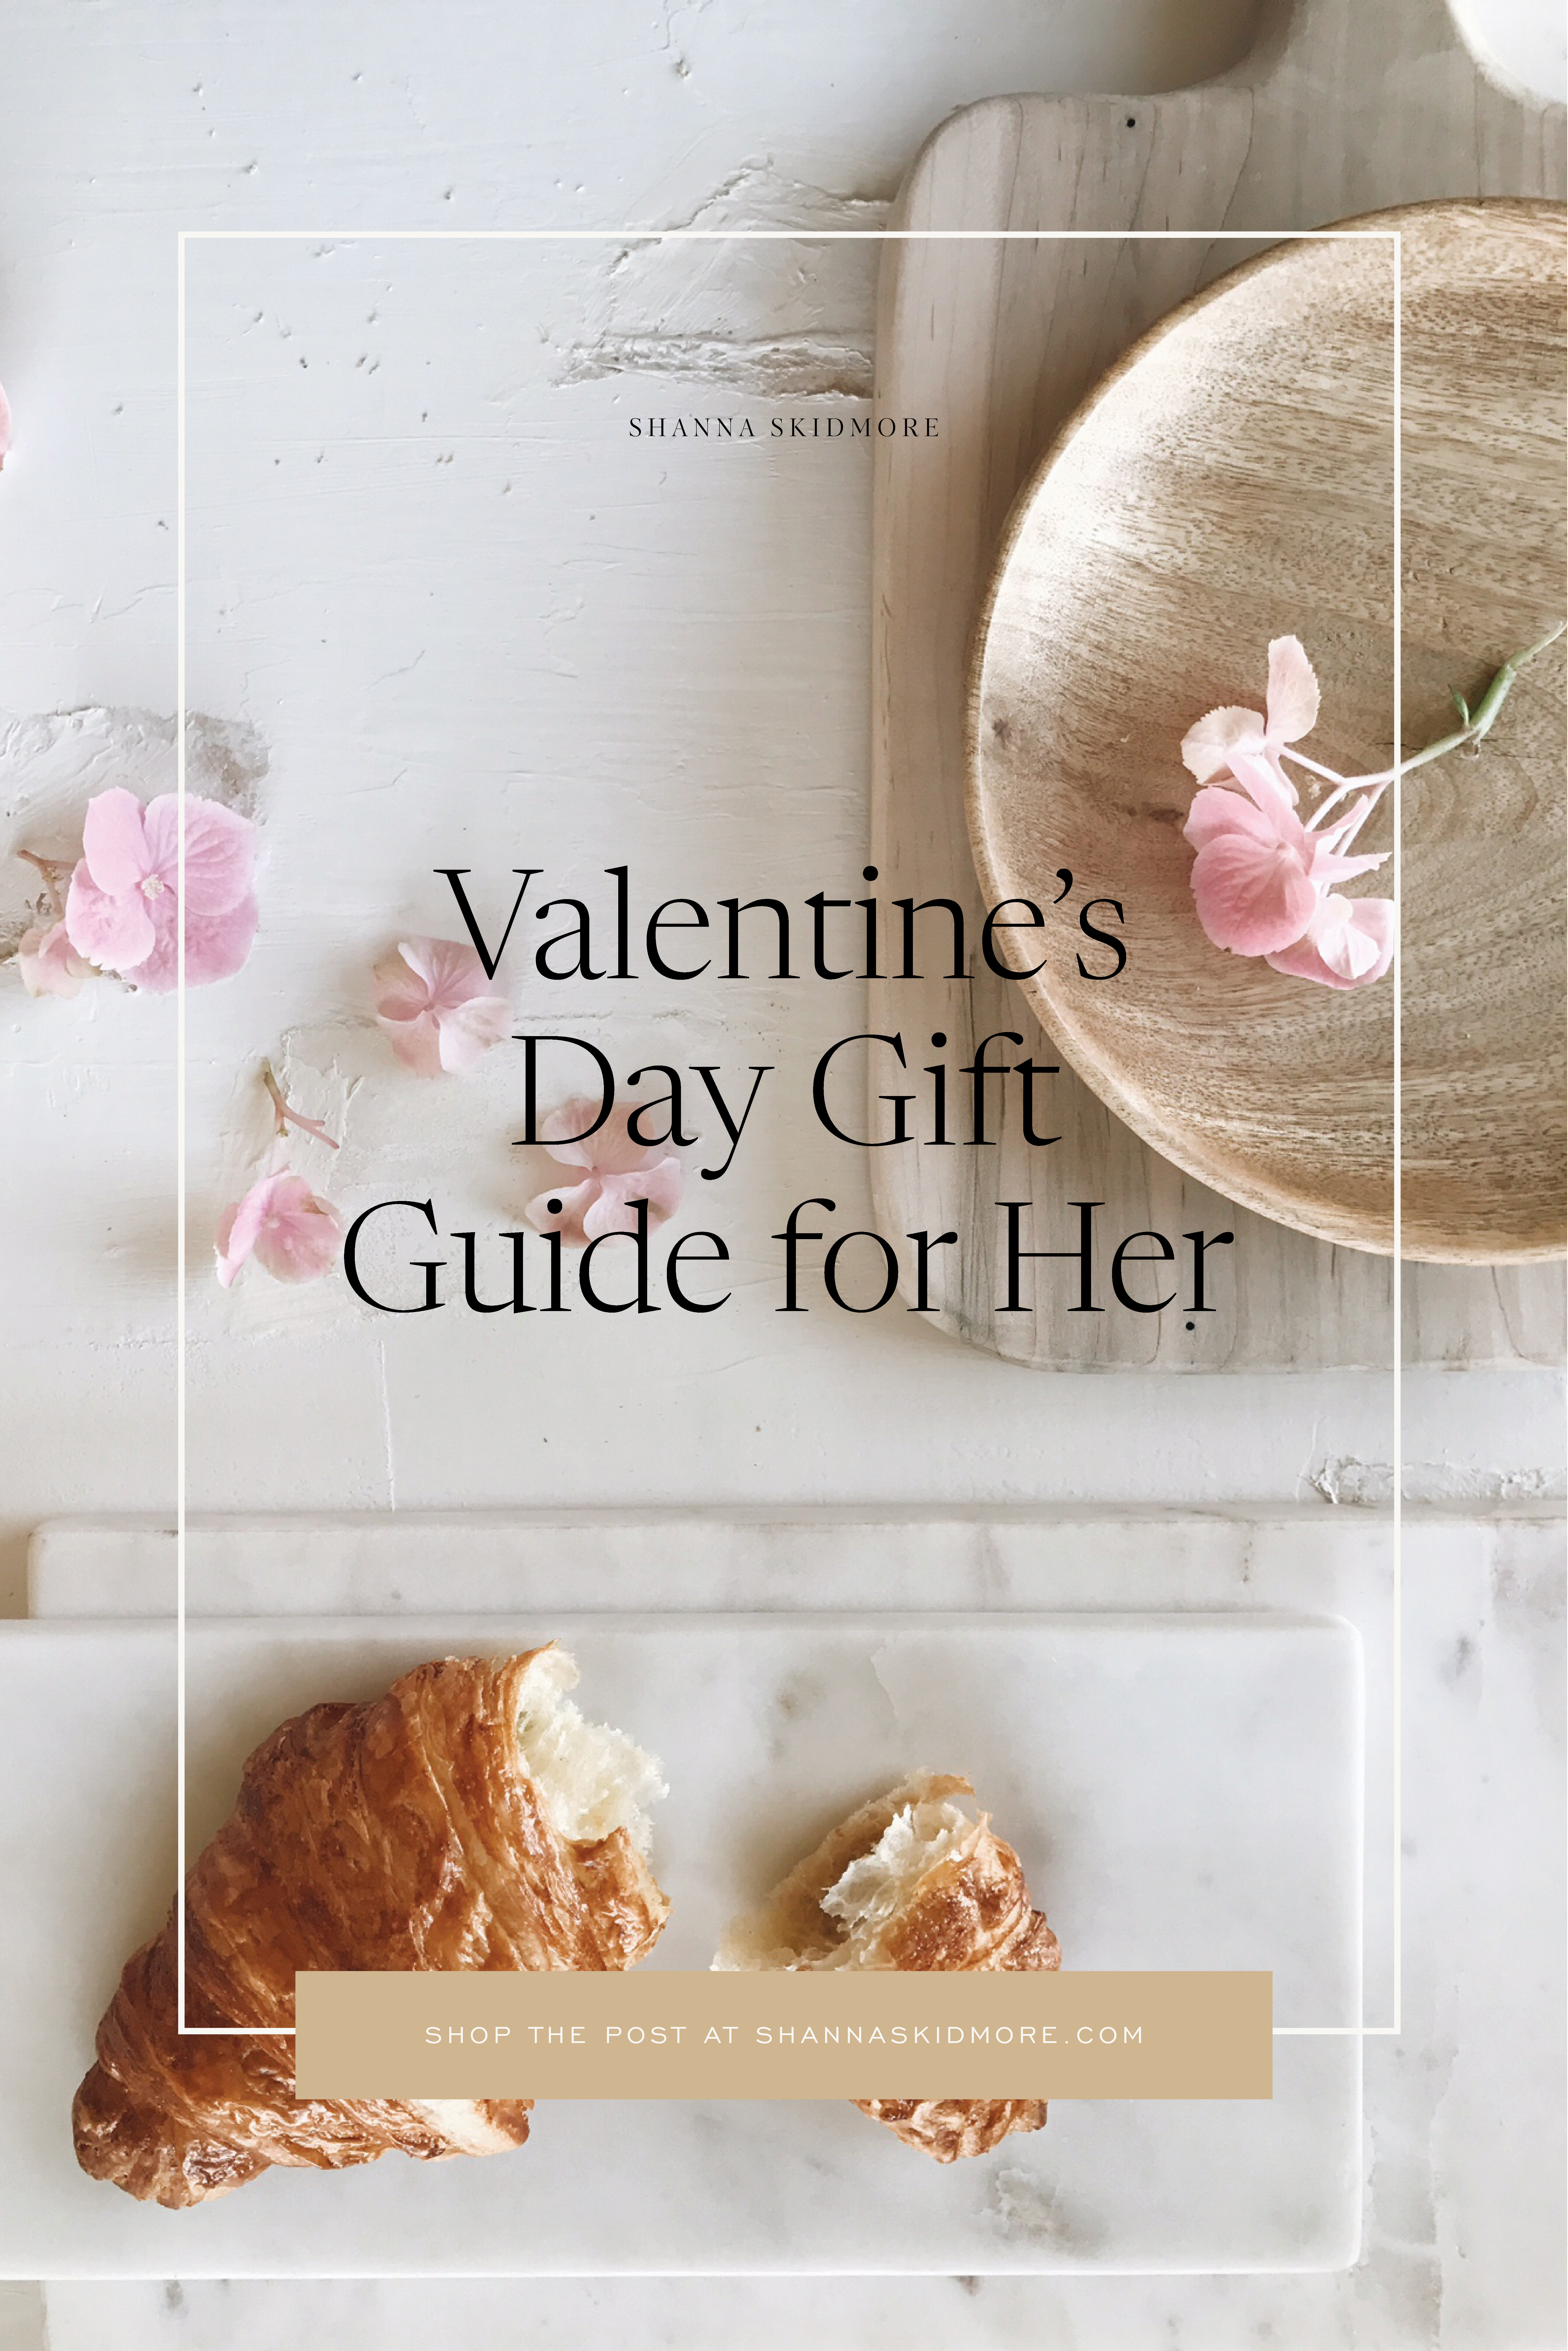 26 Dollar-Store Finds to Sweeten Your Valentine's Day on a Budget